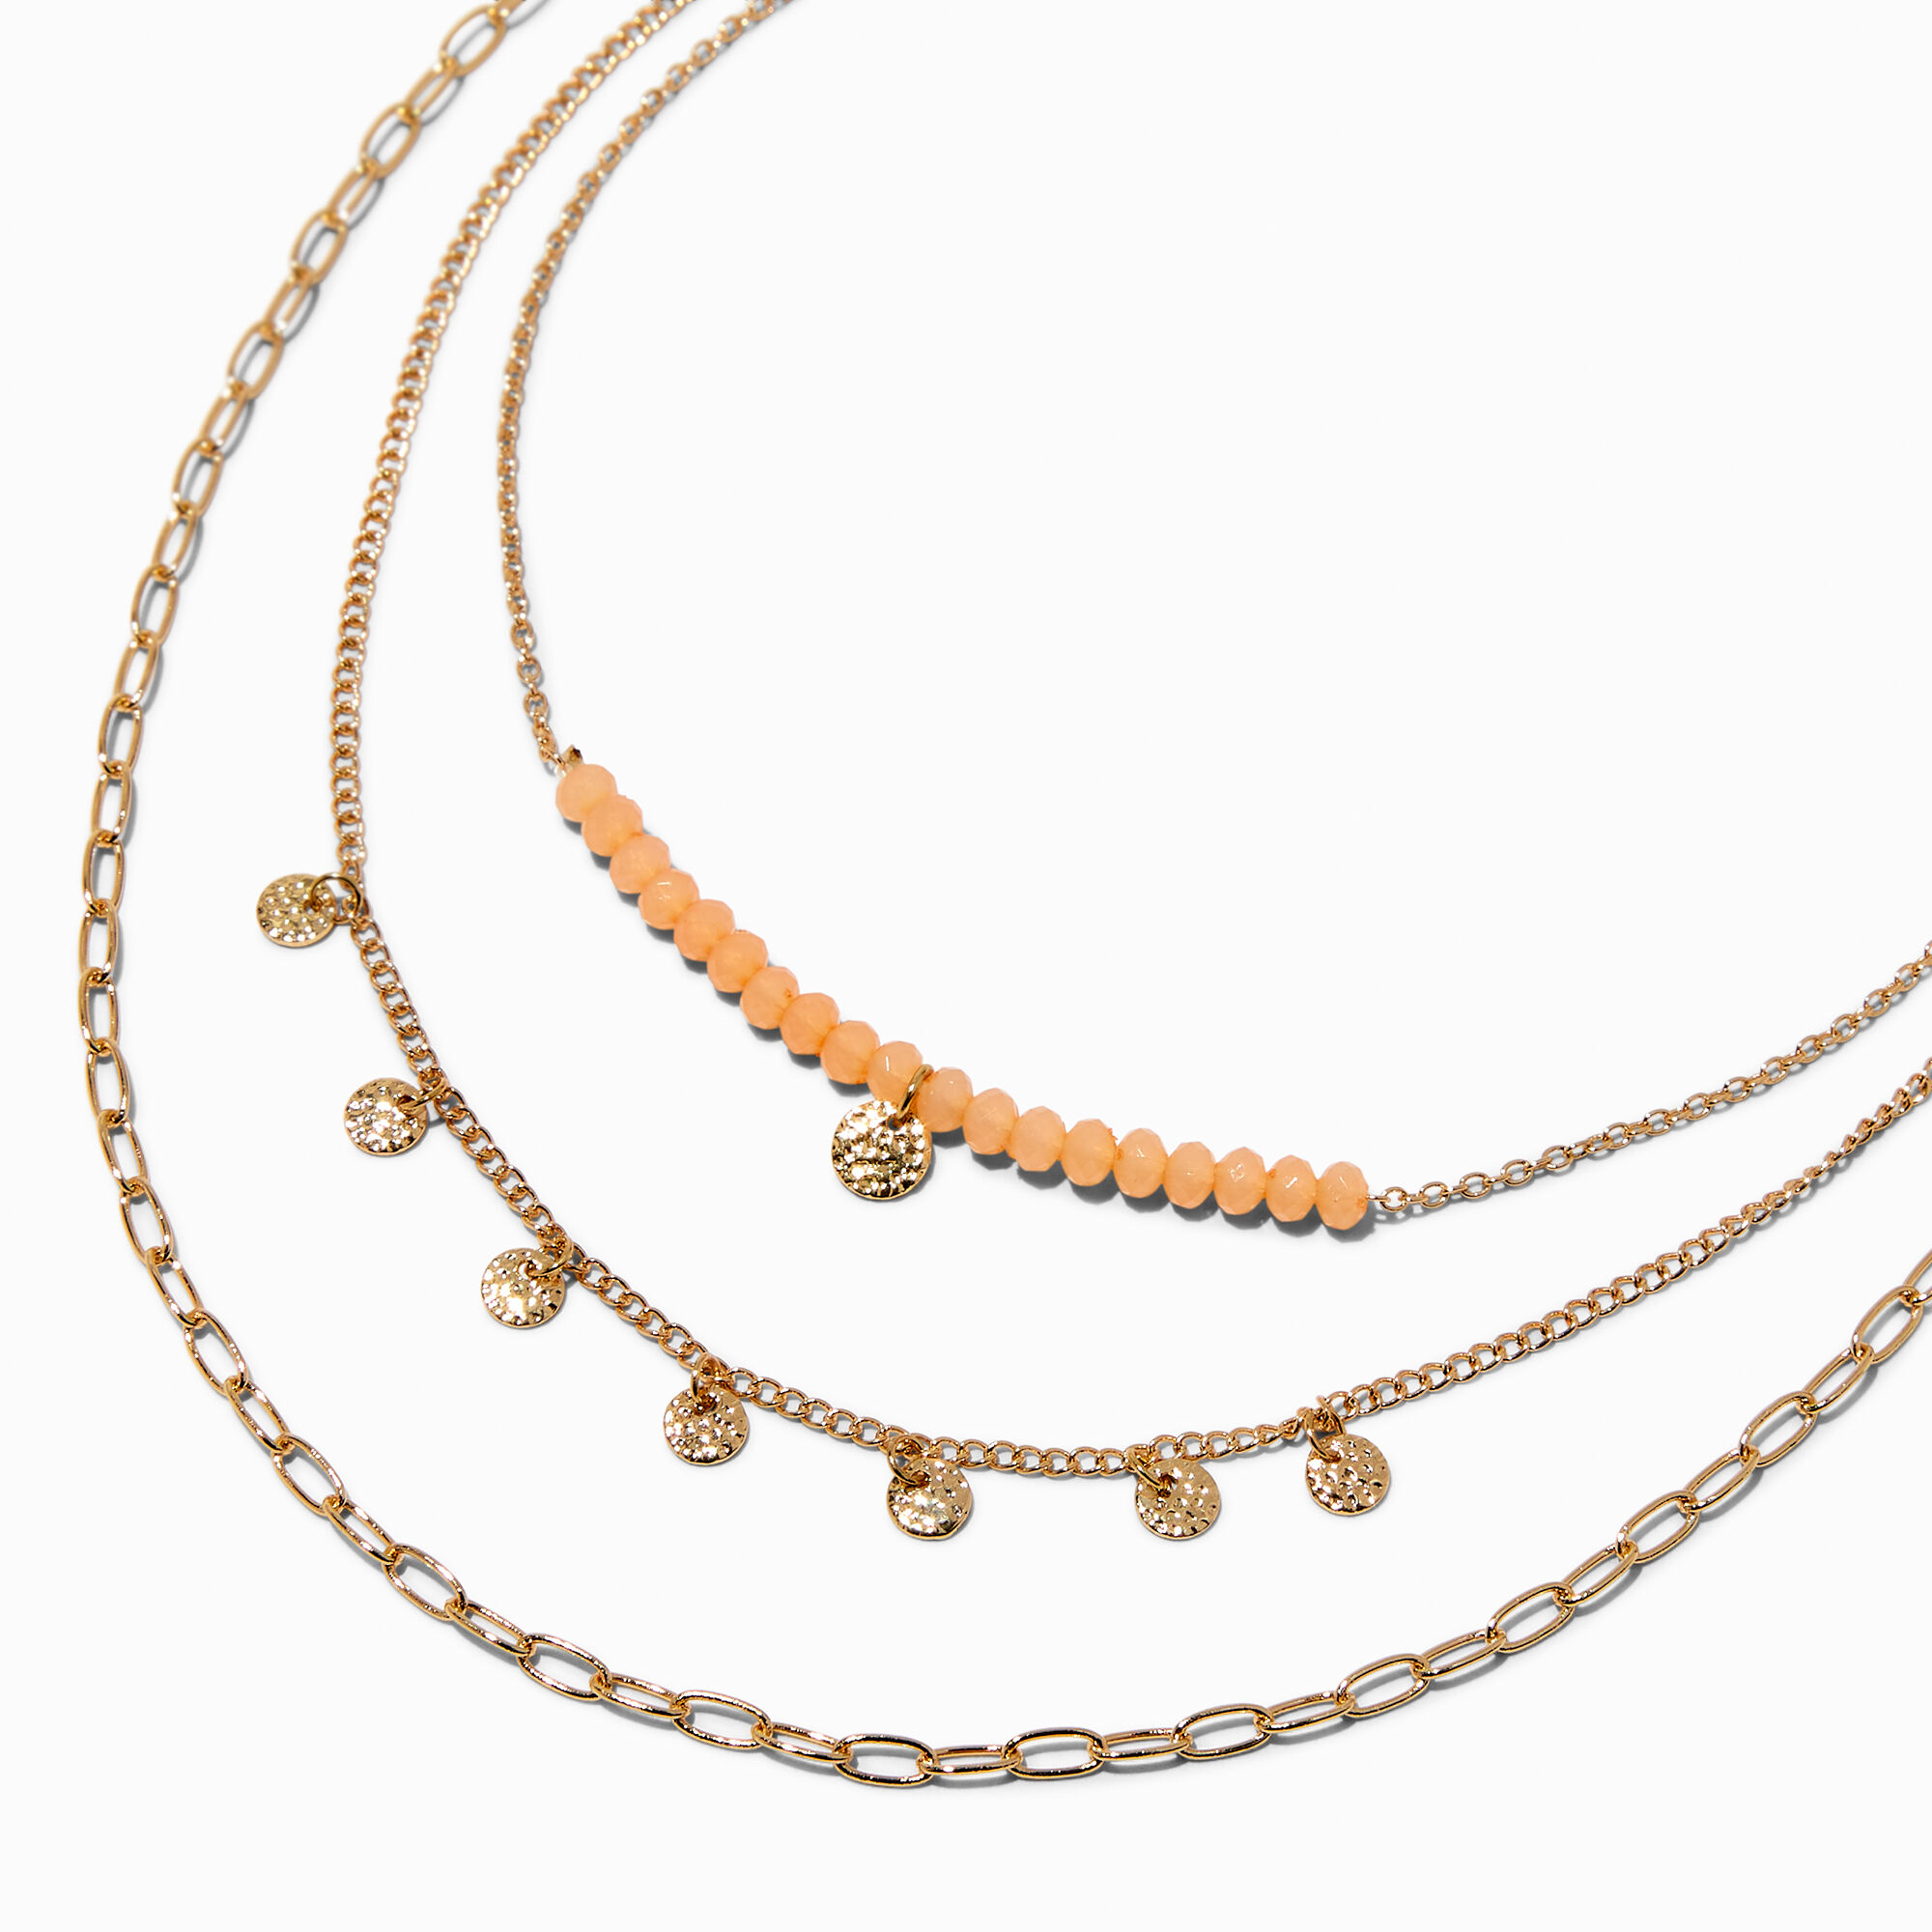 View Claires Beaded GoldTone Coin MultiStrand Necklace Peach information